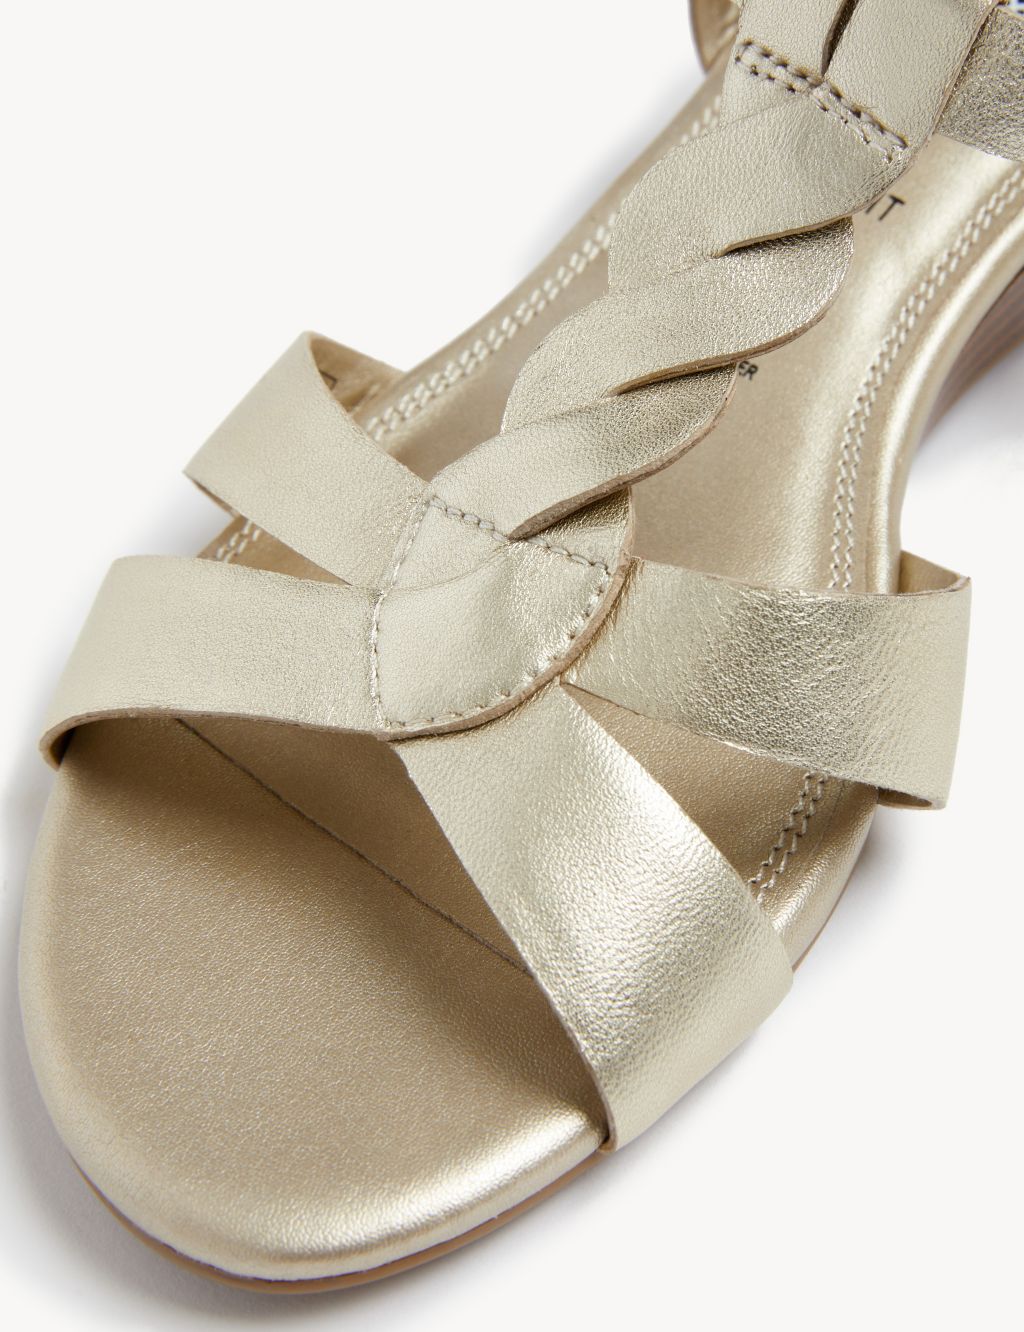 Wide Fit Leather Wedge Sandals image 2